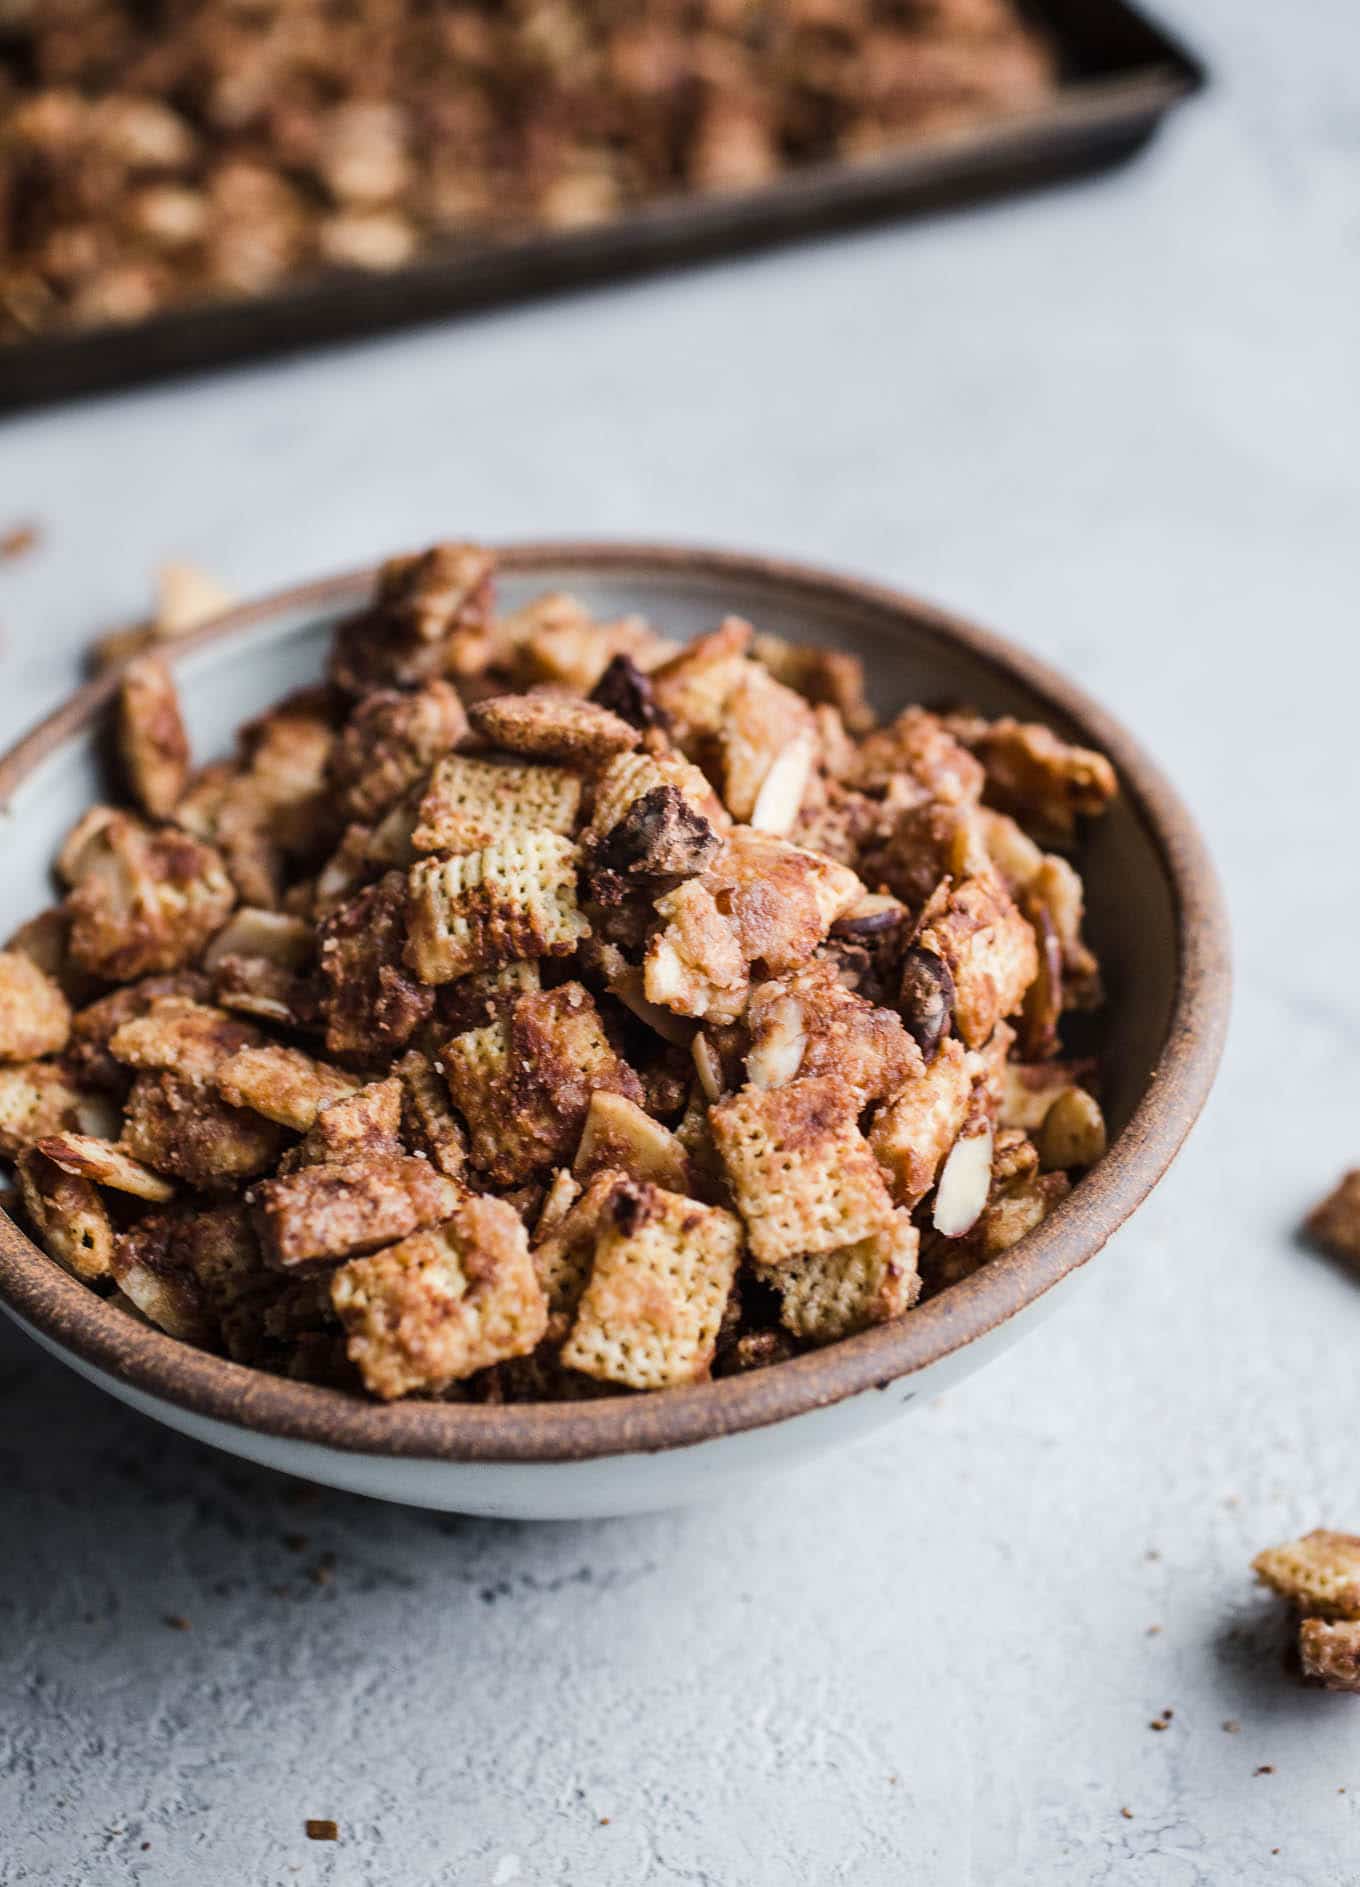 Coconut Chocolate Chex Mix is an easy dairy-free sweet chex mix made with coconut butter and maple syrup. A healthier gluten-free and vegan chex mix recipe!